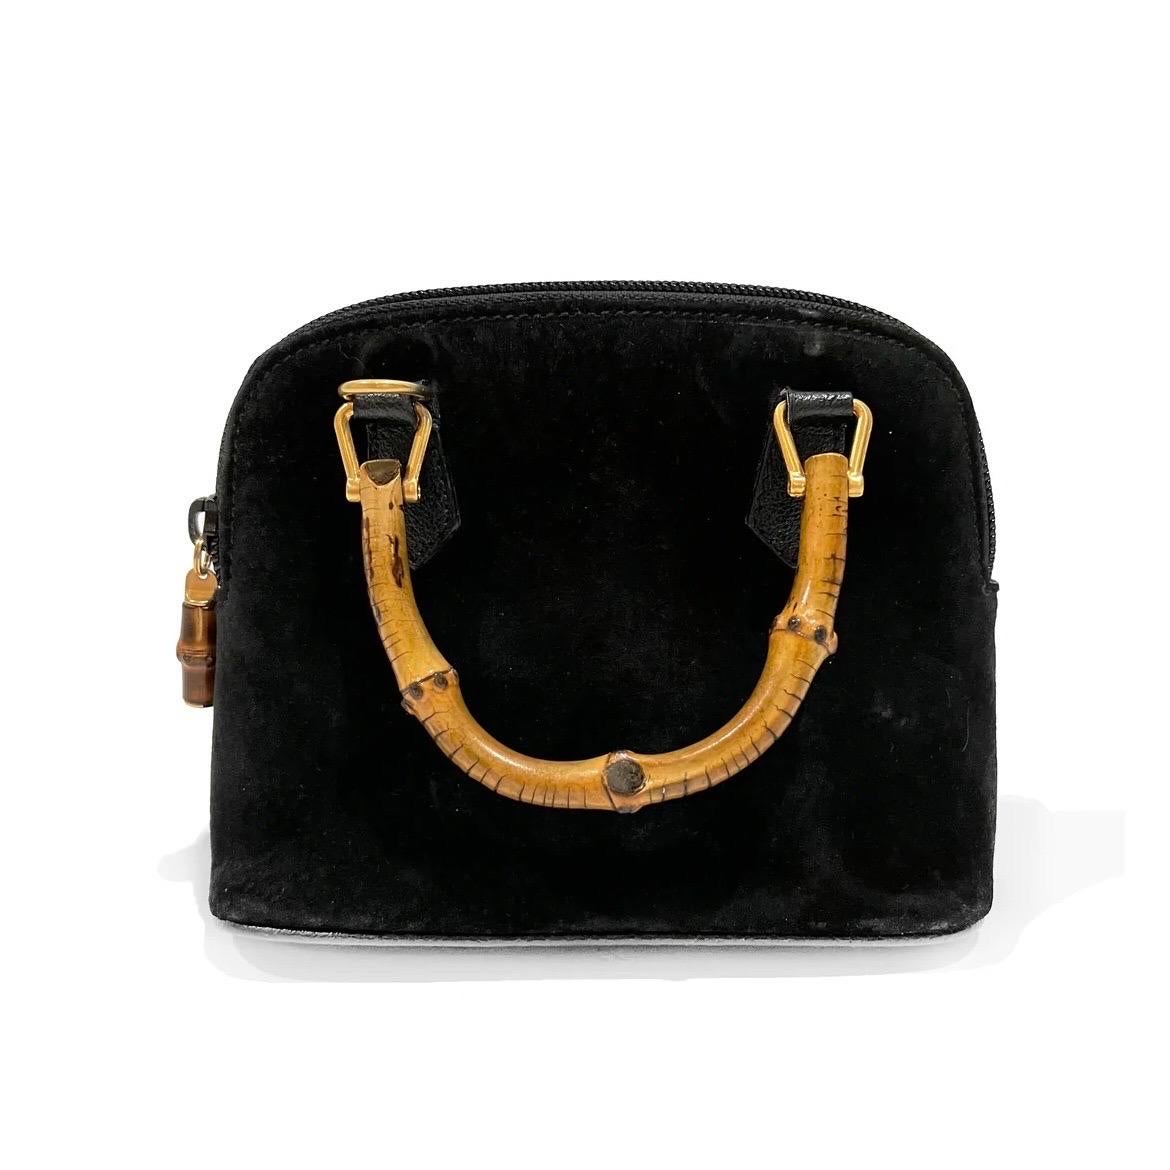 Vintage Bamboo Handle Suede Mini Bag by Gucci 
Circa 2007
Made in Italy 
Black suede
Dual bamboo top handles
Bamboo zip detail
Top zip closure
Gold-tone hardware 
Interior pocket with zip closure
Leather bottom
Great Vintage Condition; Preloved with